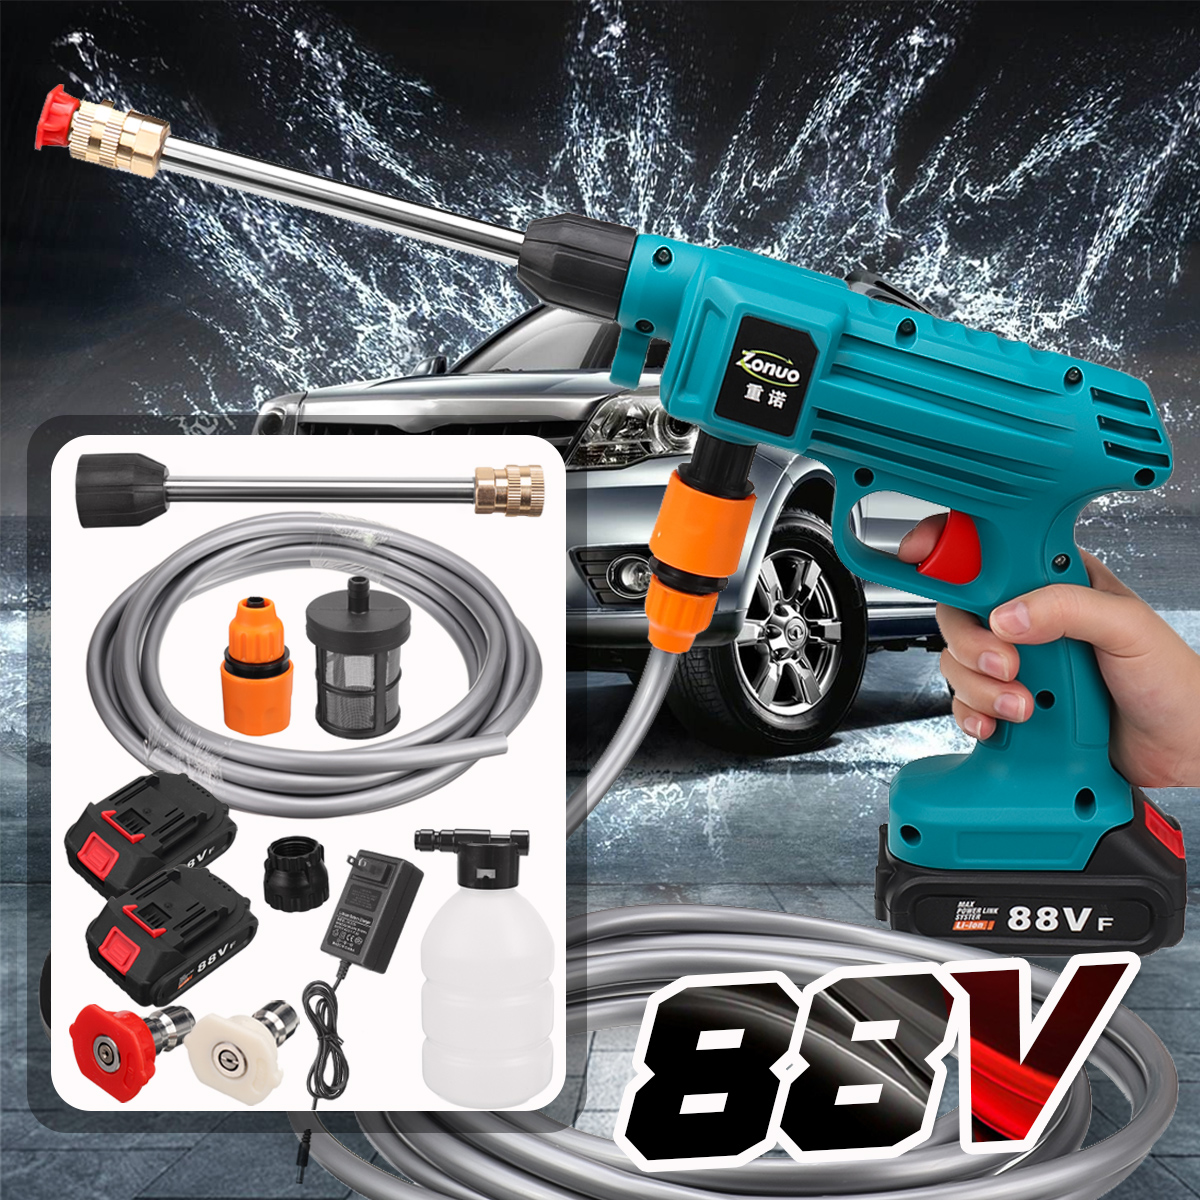 88VF-Cordless-High-Pressure-Washer-Car-Washing-Spray-Guns-Water-Cleaner-W-12-Battery-For-MAKITA-1870563-1